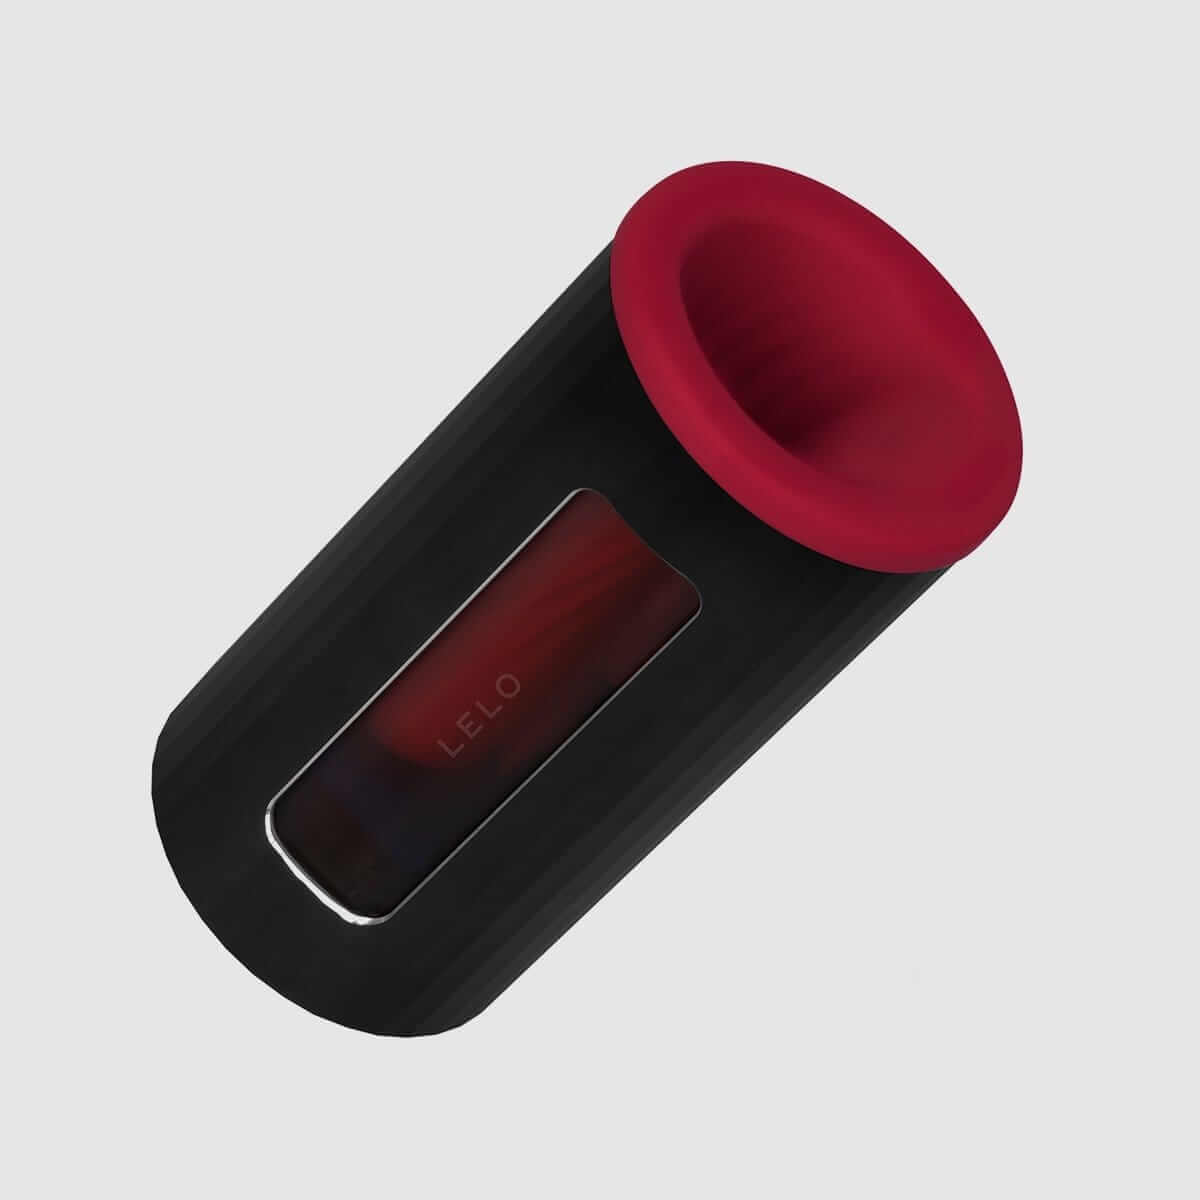 Lelo F1s Developer's Kit - Red - Thorn & Feather Sex Toy Canada